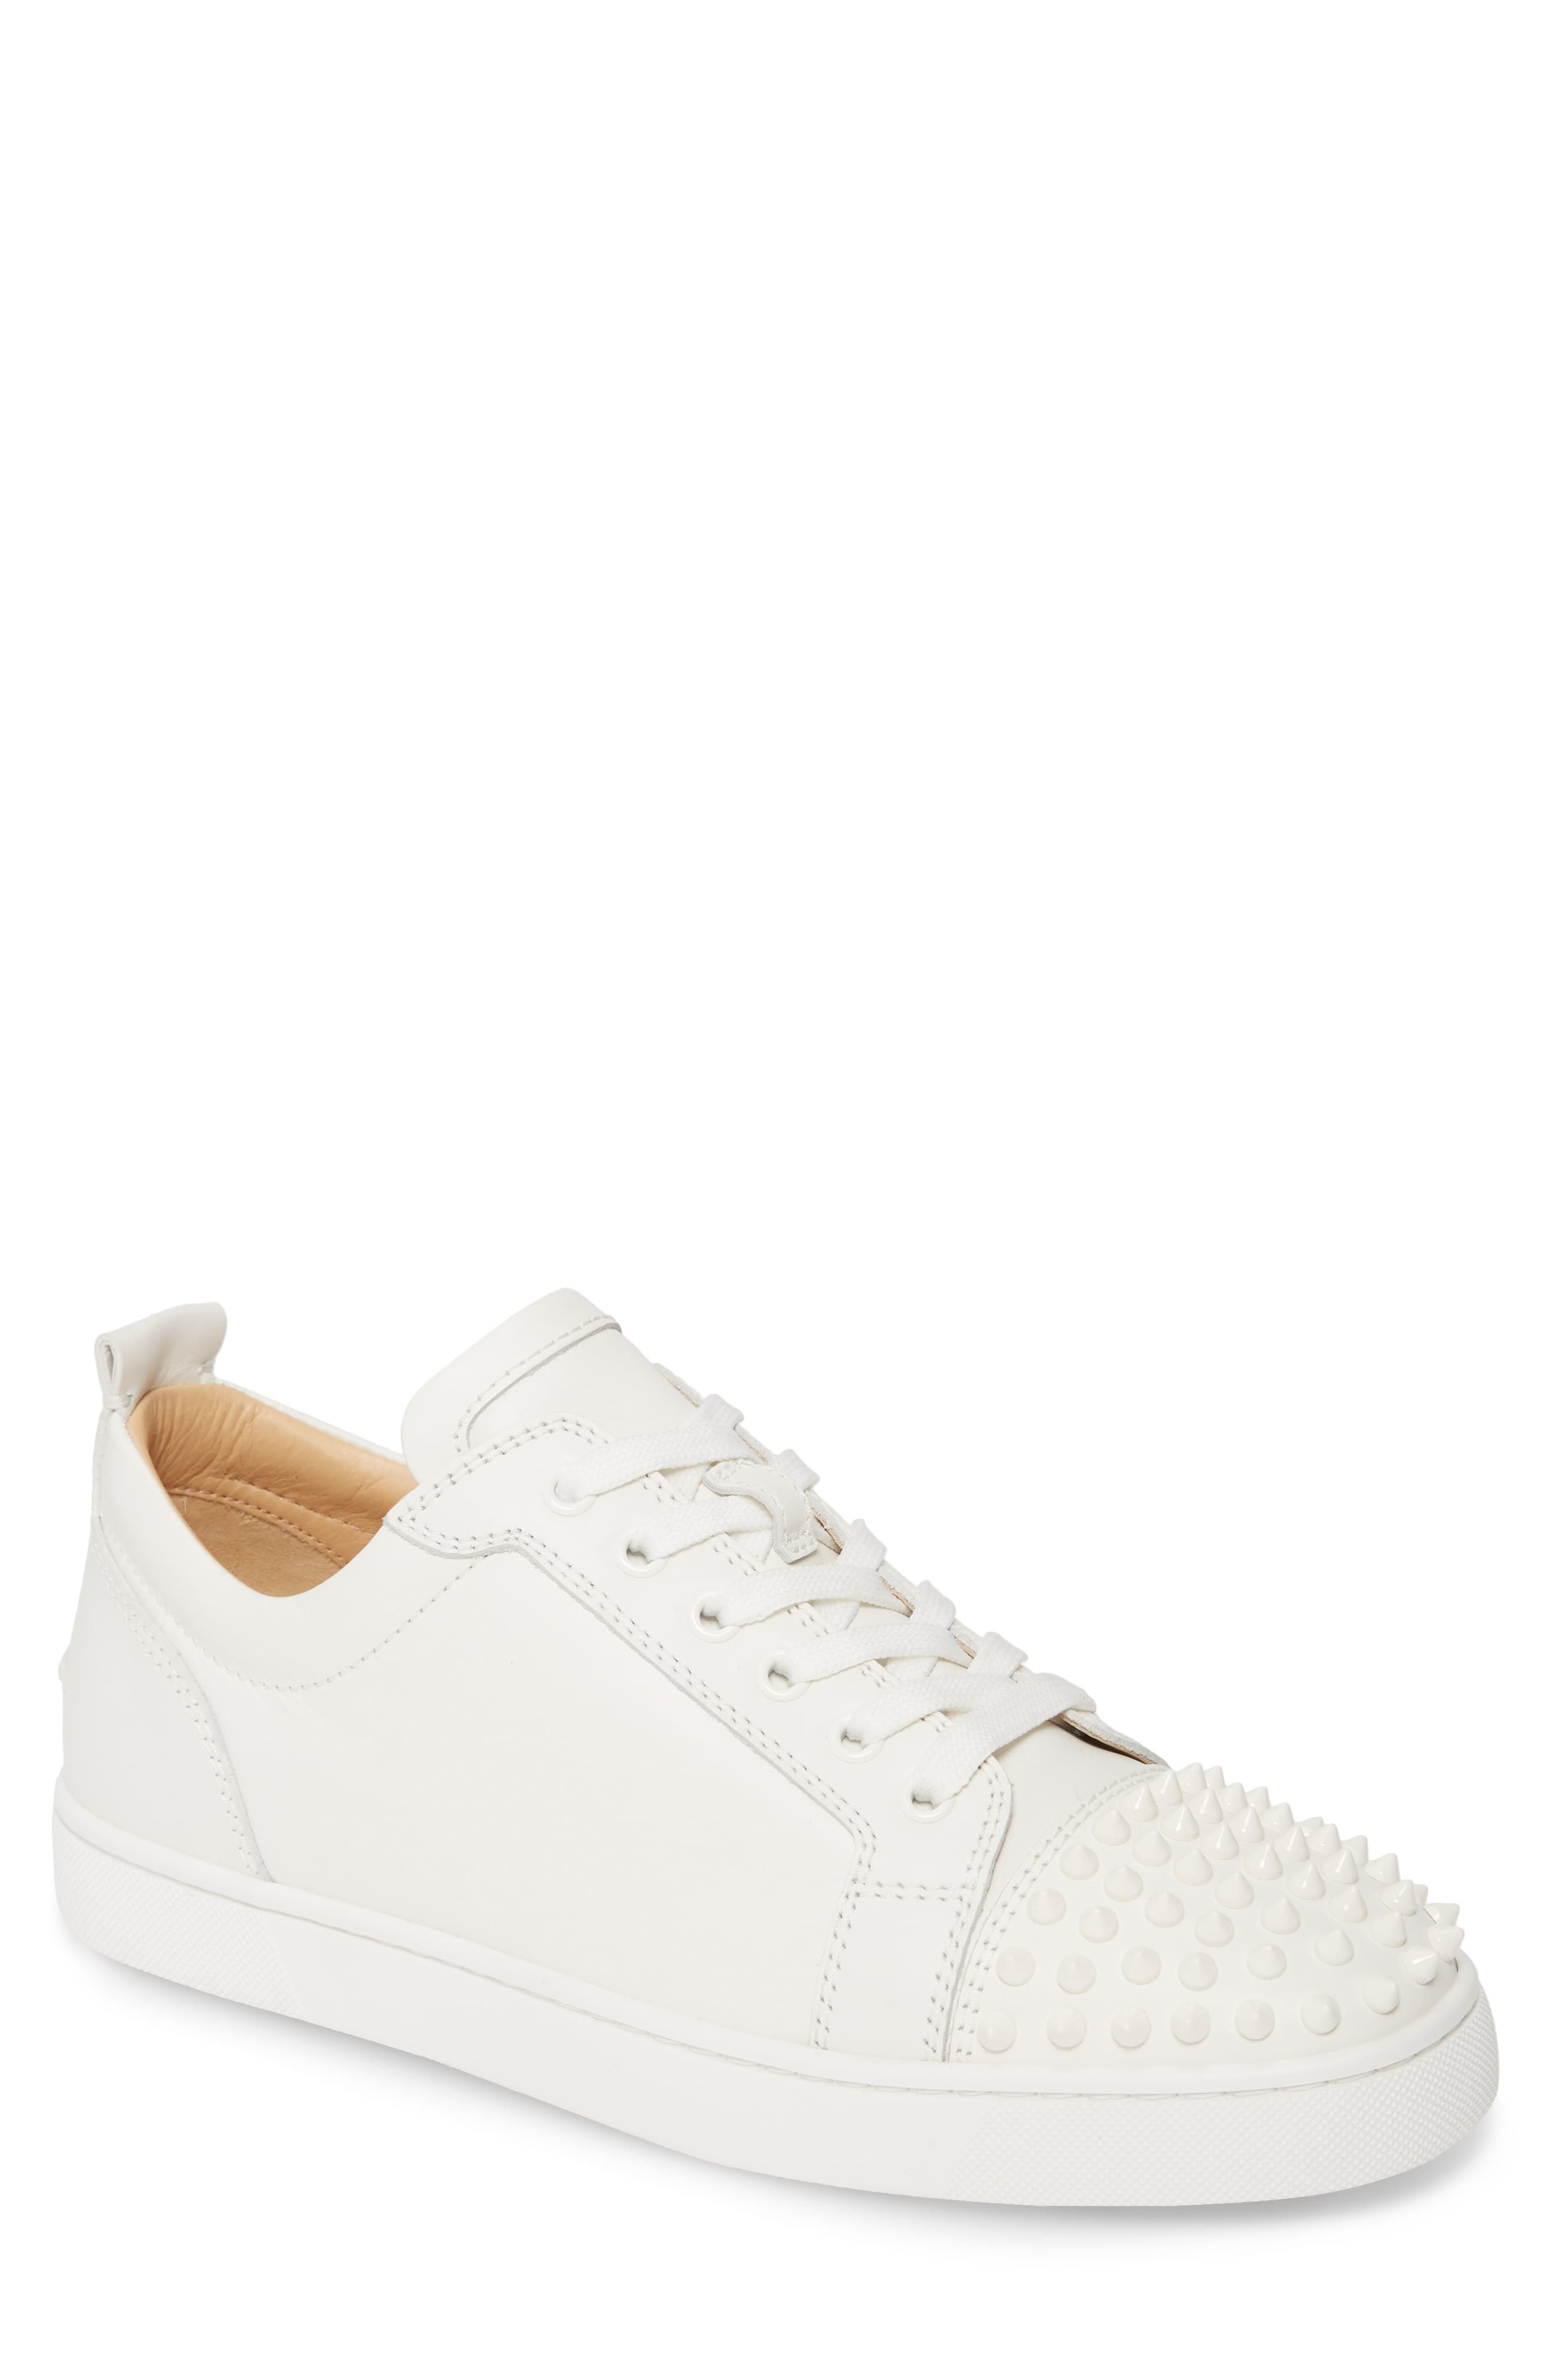 white louboutin spiked sneakers